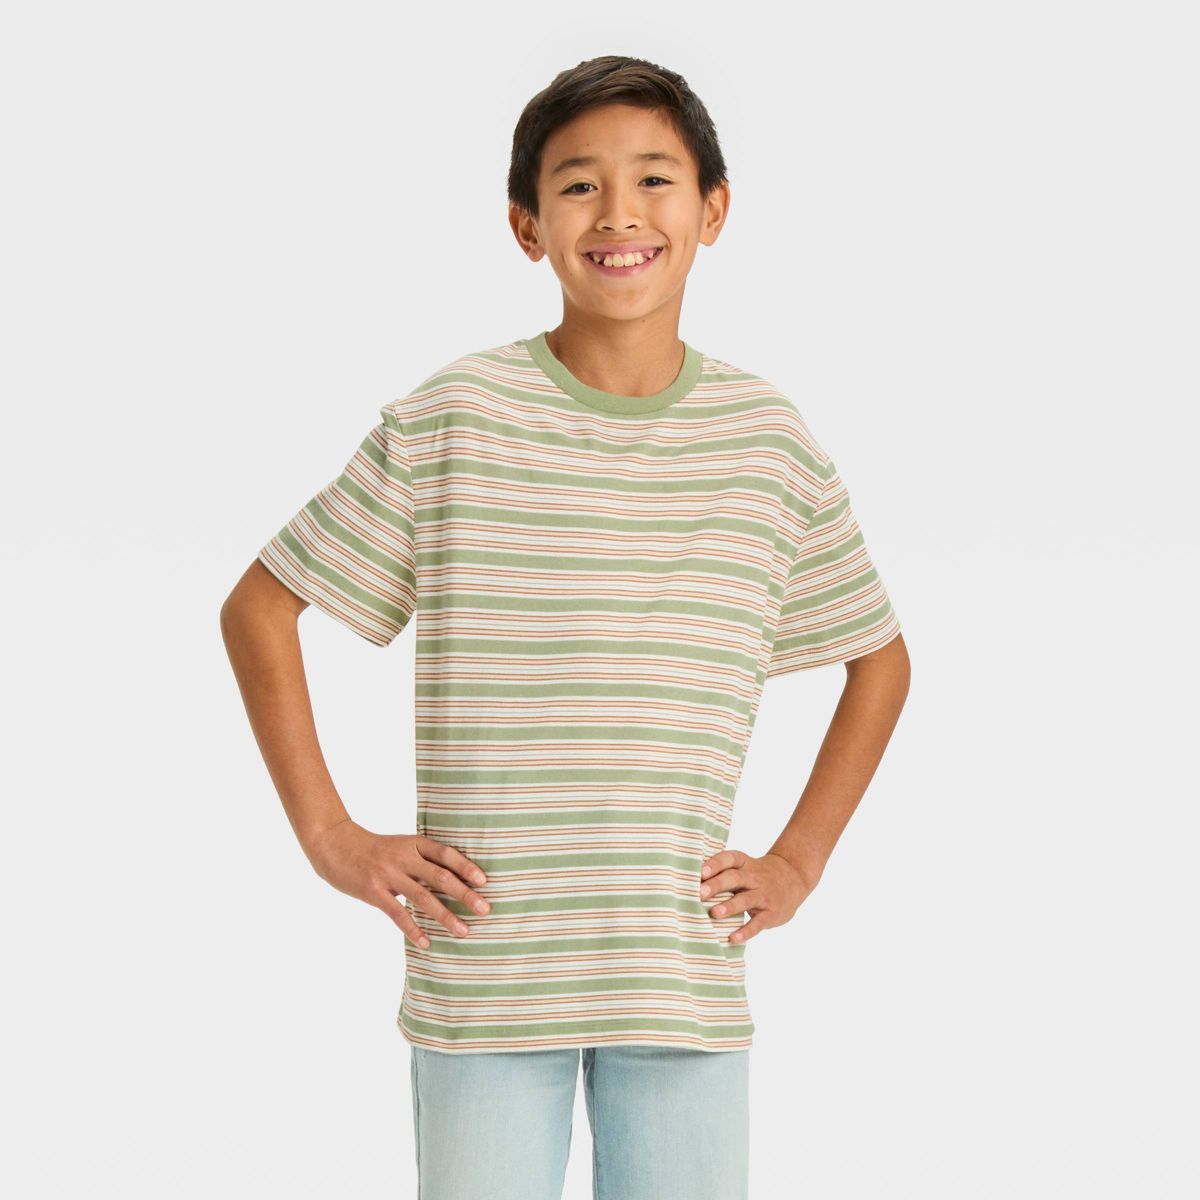 Boys' Short Sleeve Graphic T-Shirt with Horizontal Striped - art class™ Olive Green | Target